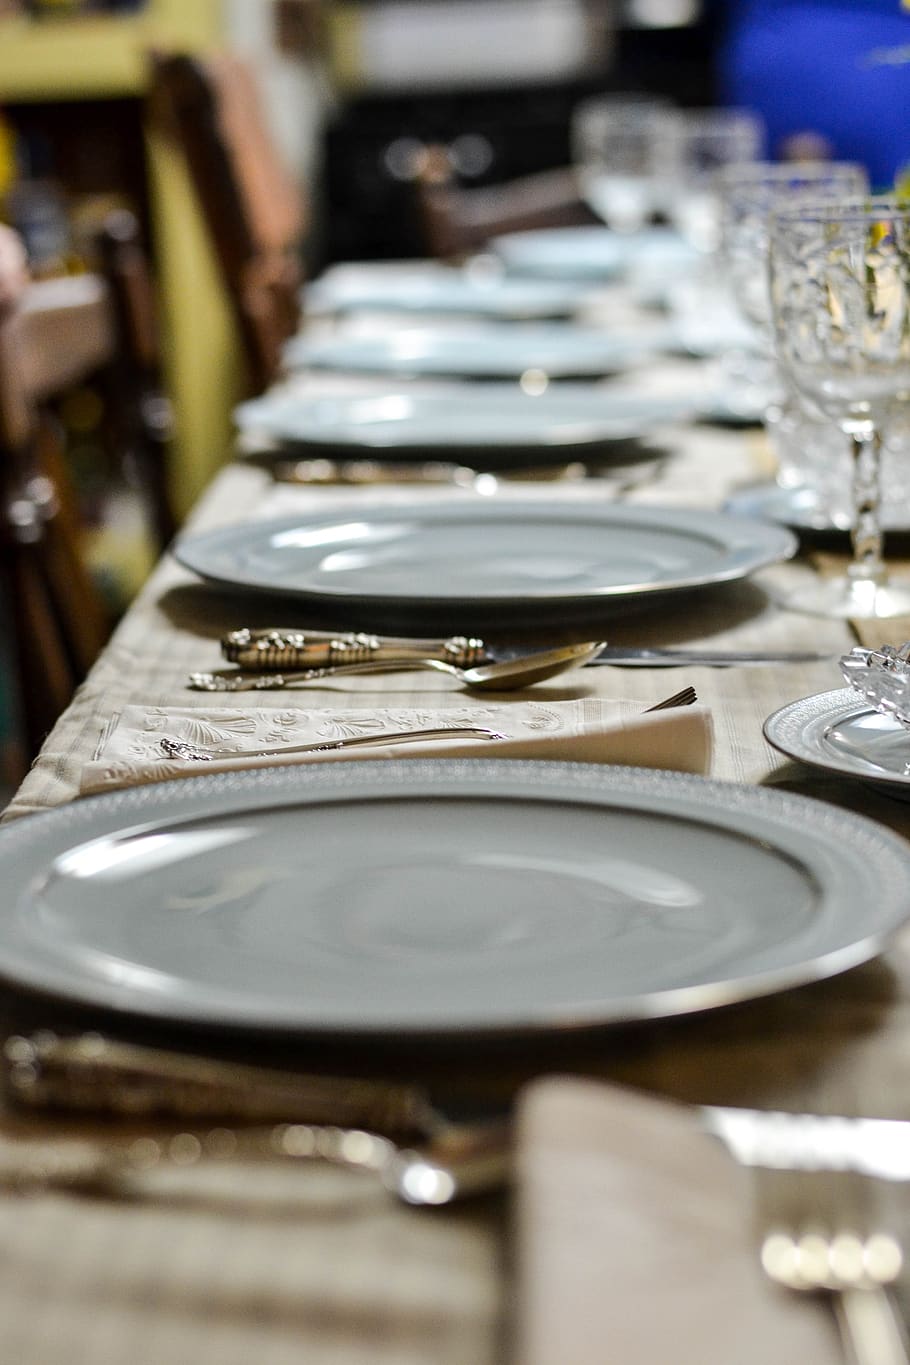 family dinner, thanksgiving, meal, holiday, celebration, traditional, place setting, china, indoors, table